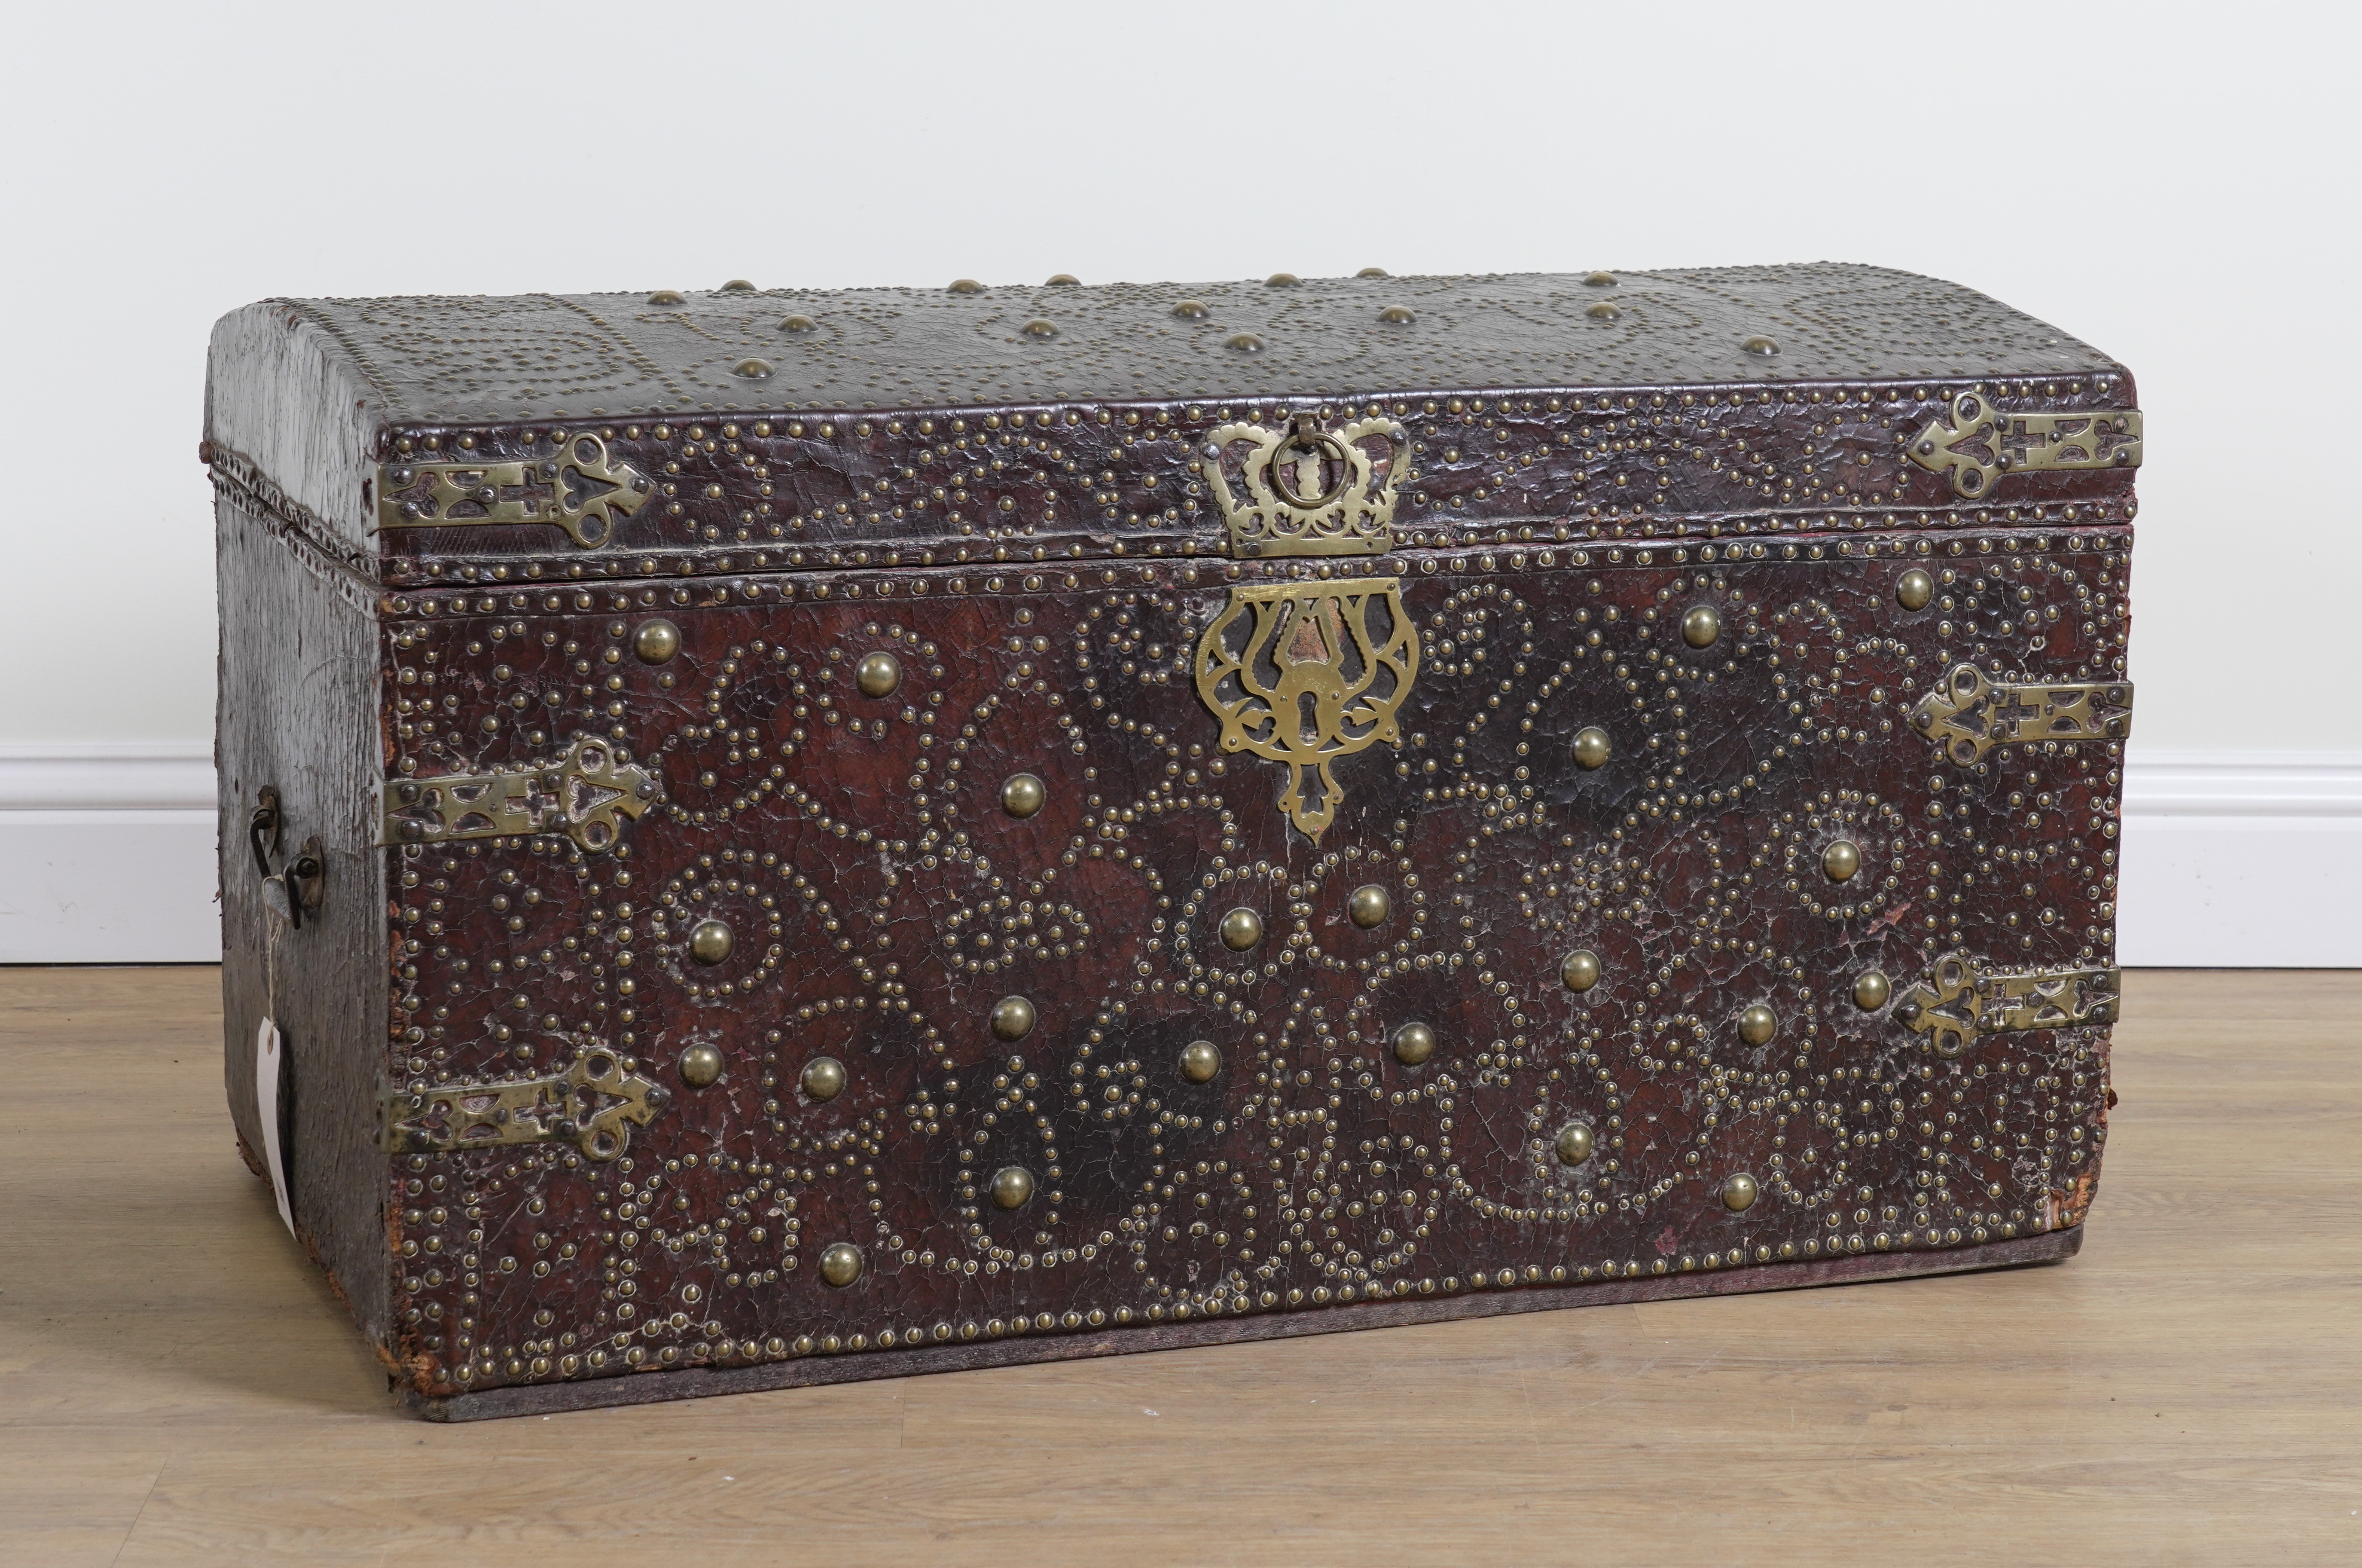 AN EARLY 18TH CENTURY BRASS STUDDED LEATHER VENEERED DOME TOPPED TRUNK - Image 2 of 8